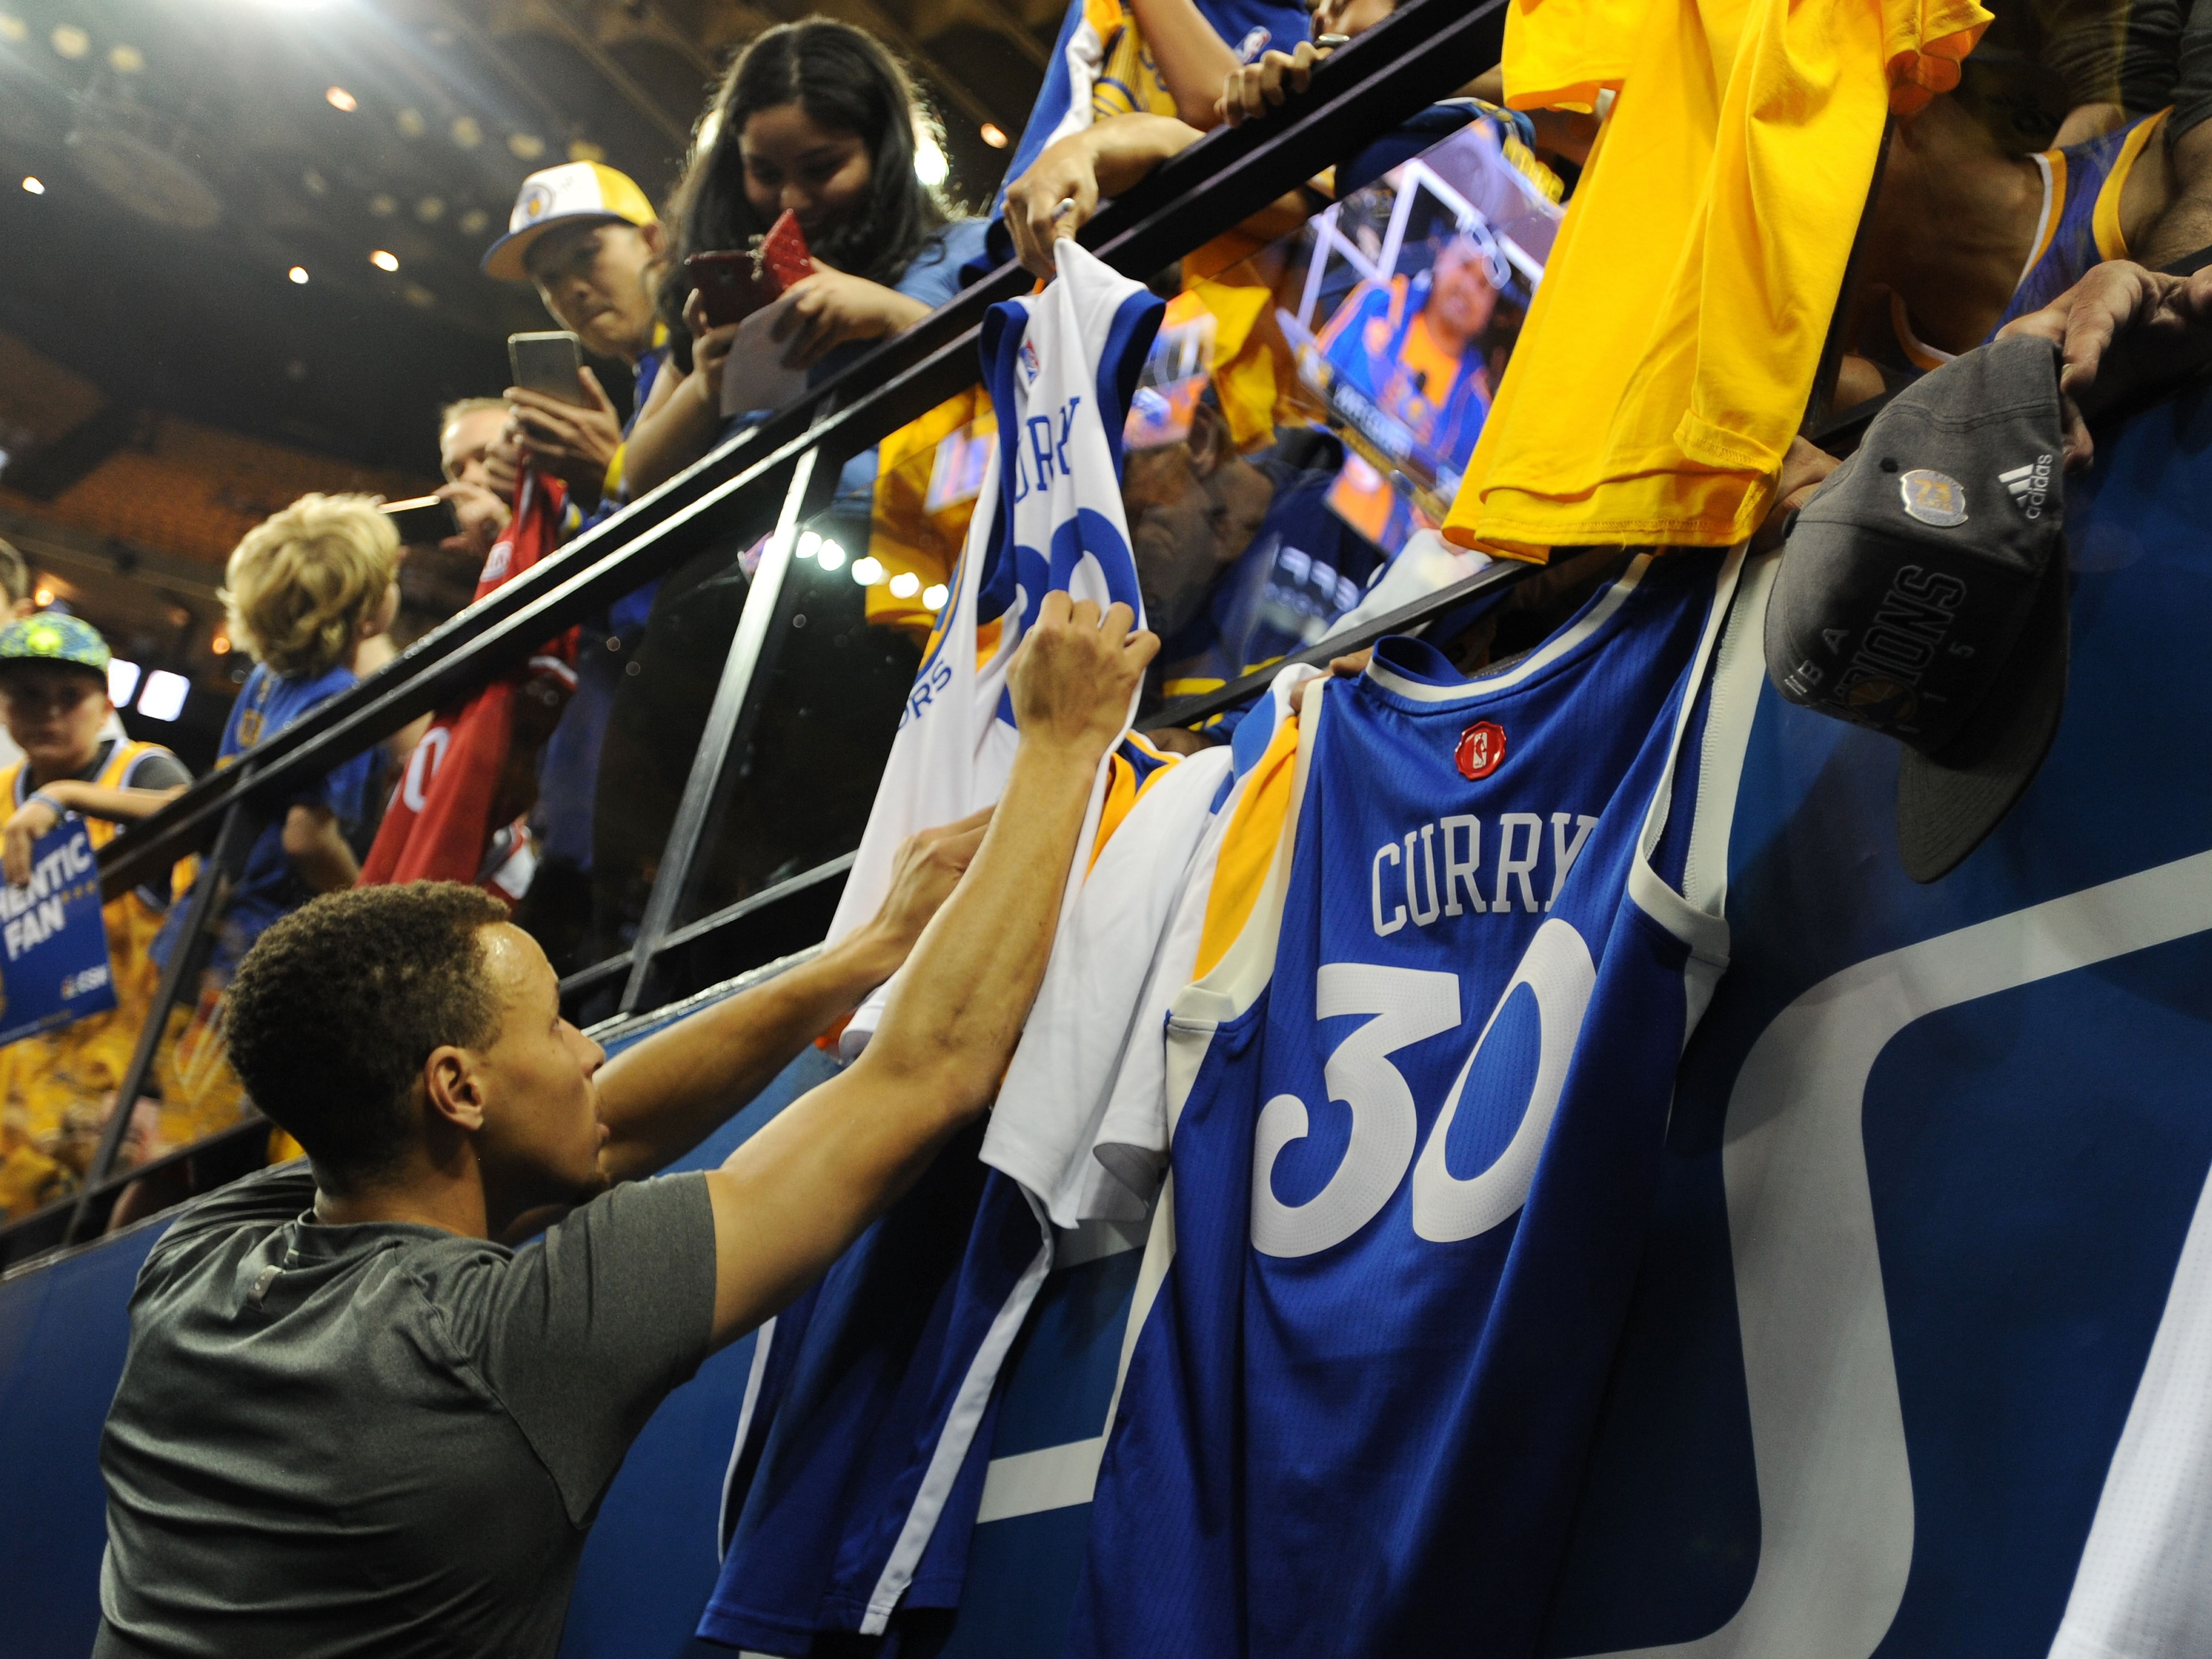 Steph Curry signing jerseys before an NBA game.